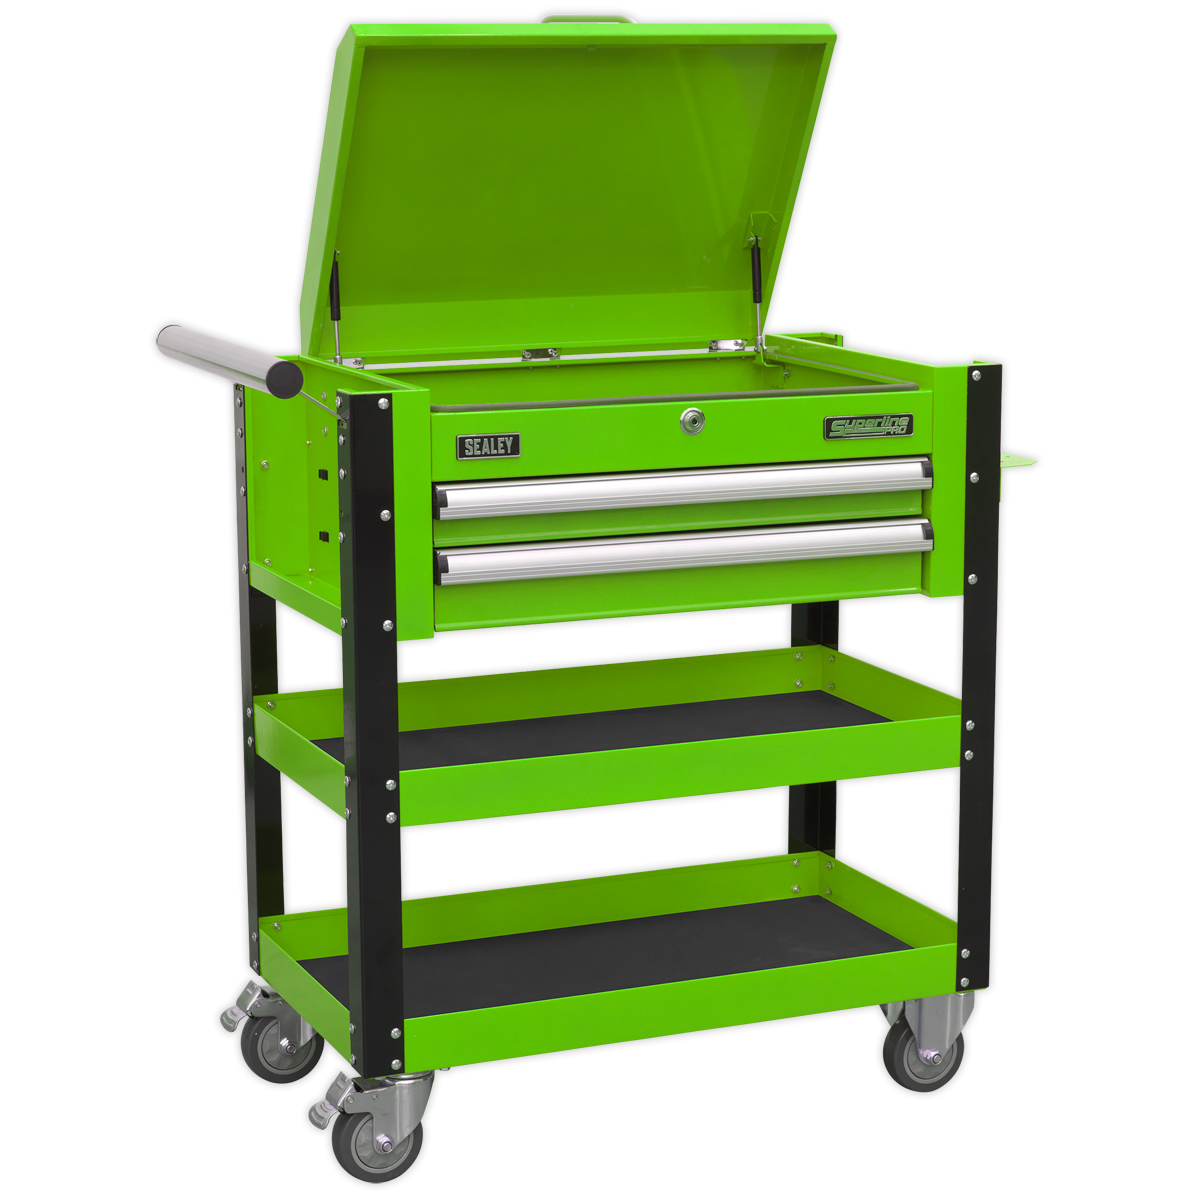 Sealey Heavy-Duty Mobile Tool & Parts Trolley 2 Drawers & Lockable Top - Green